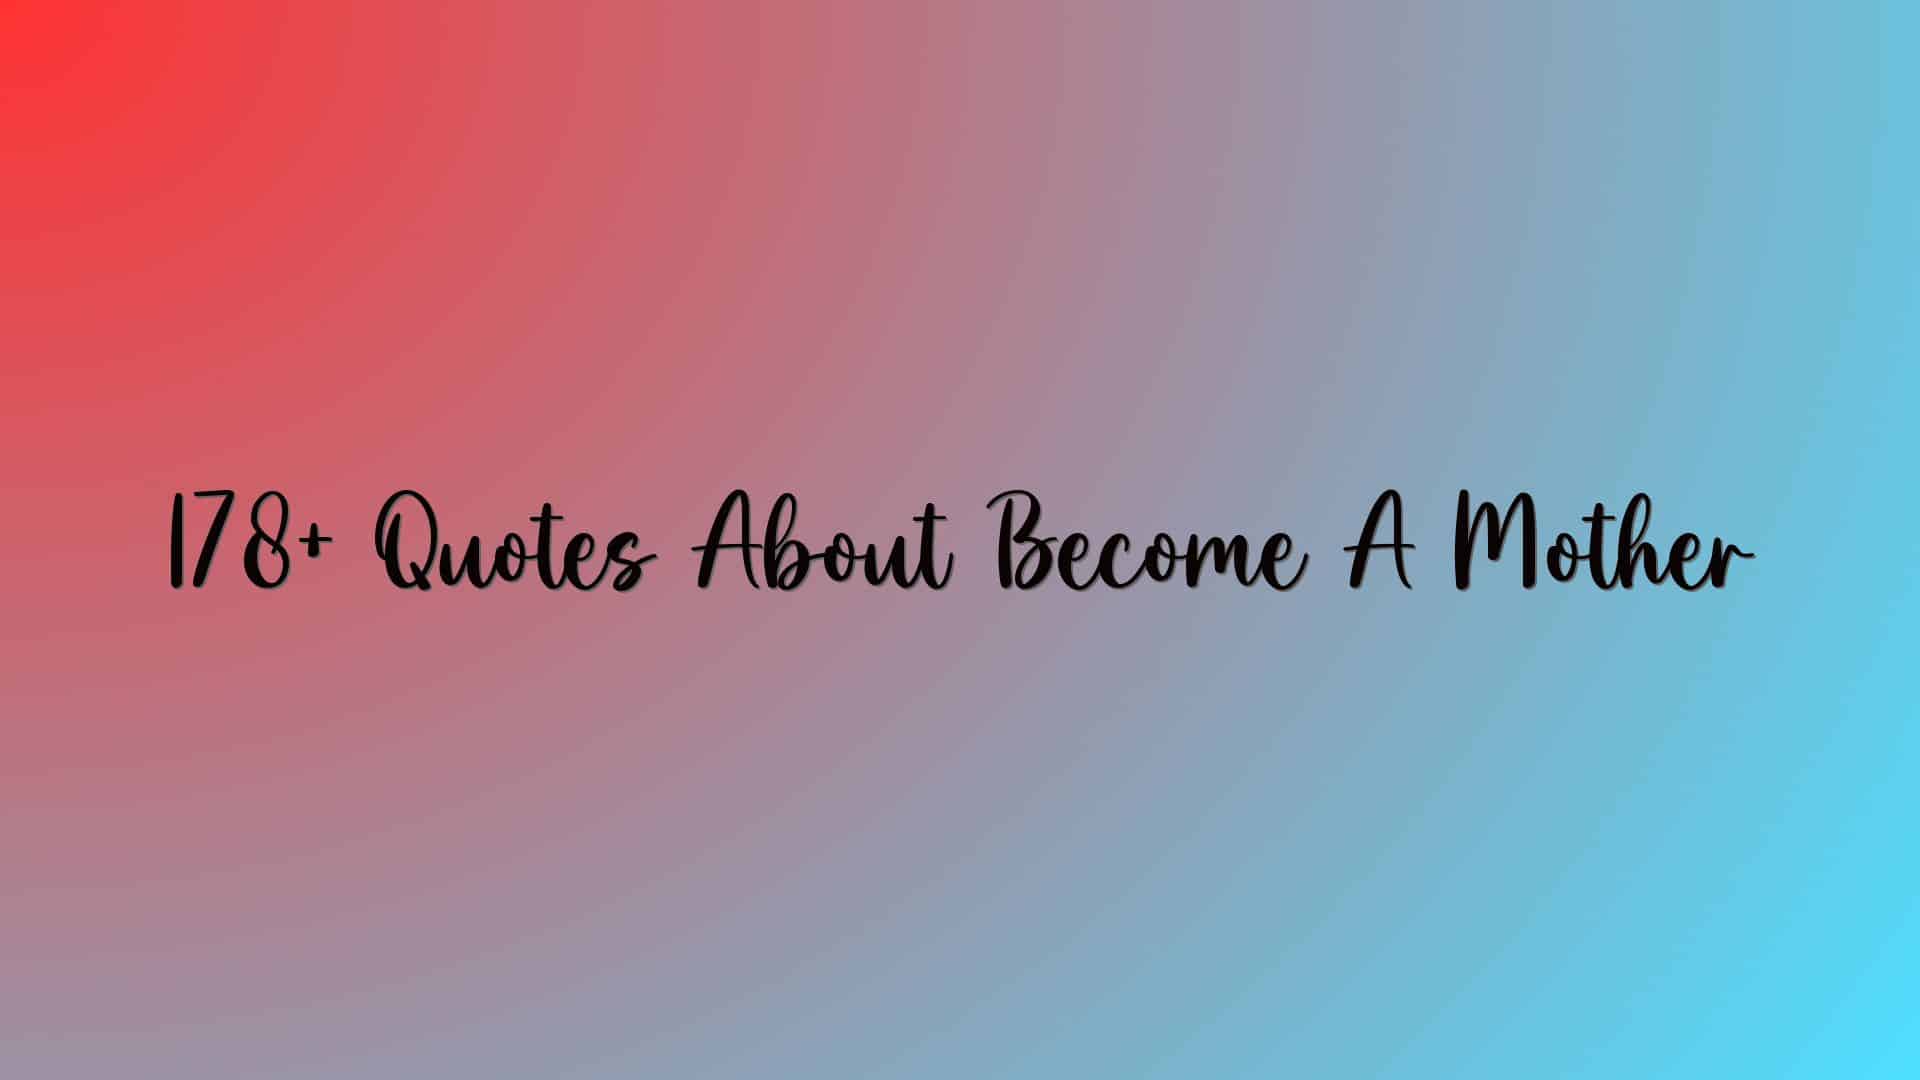 178+ Quotes About Become A Mother